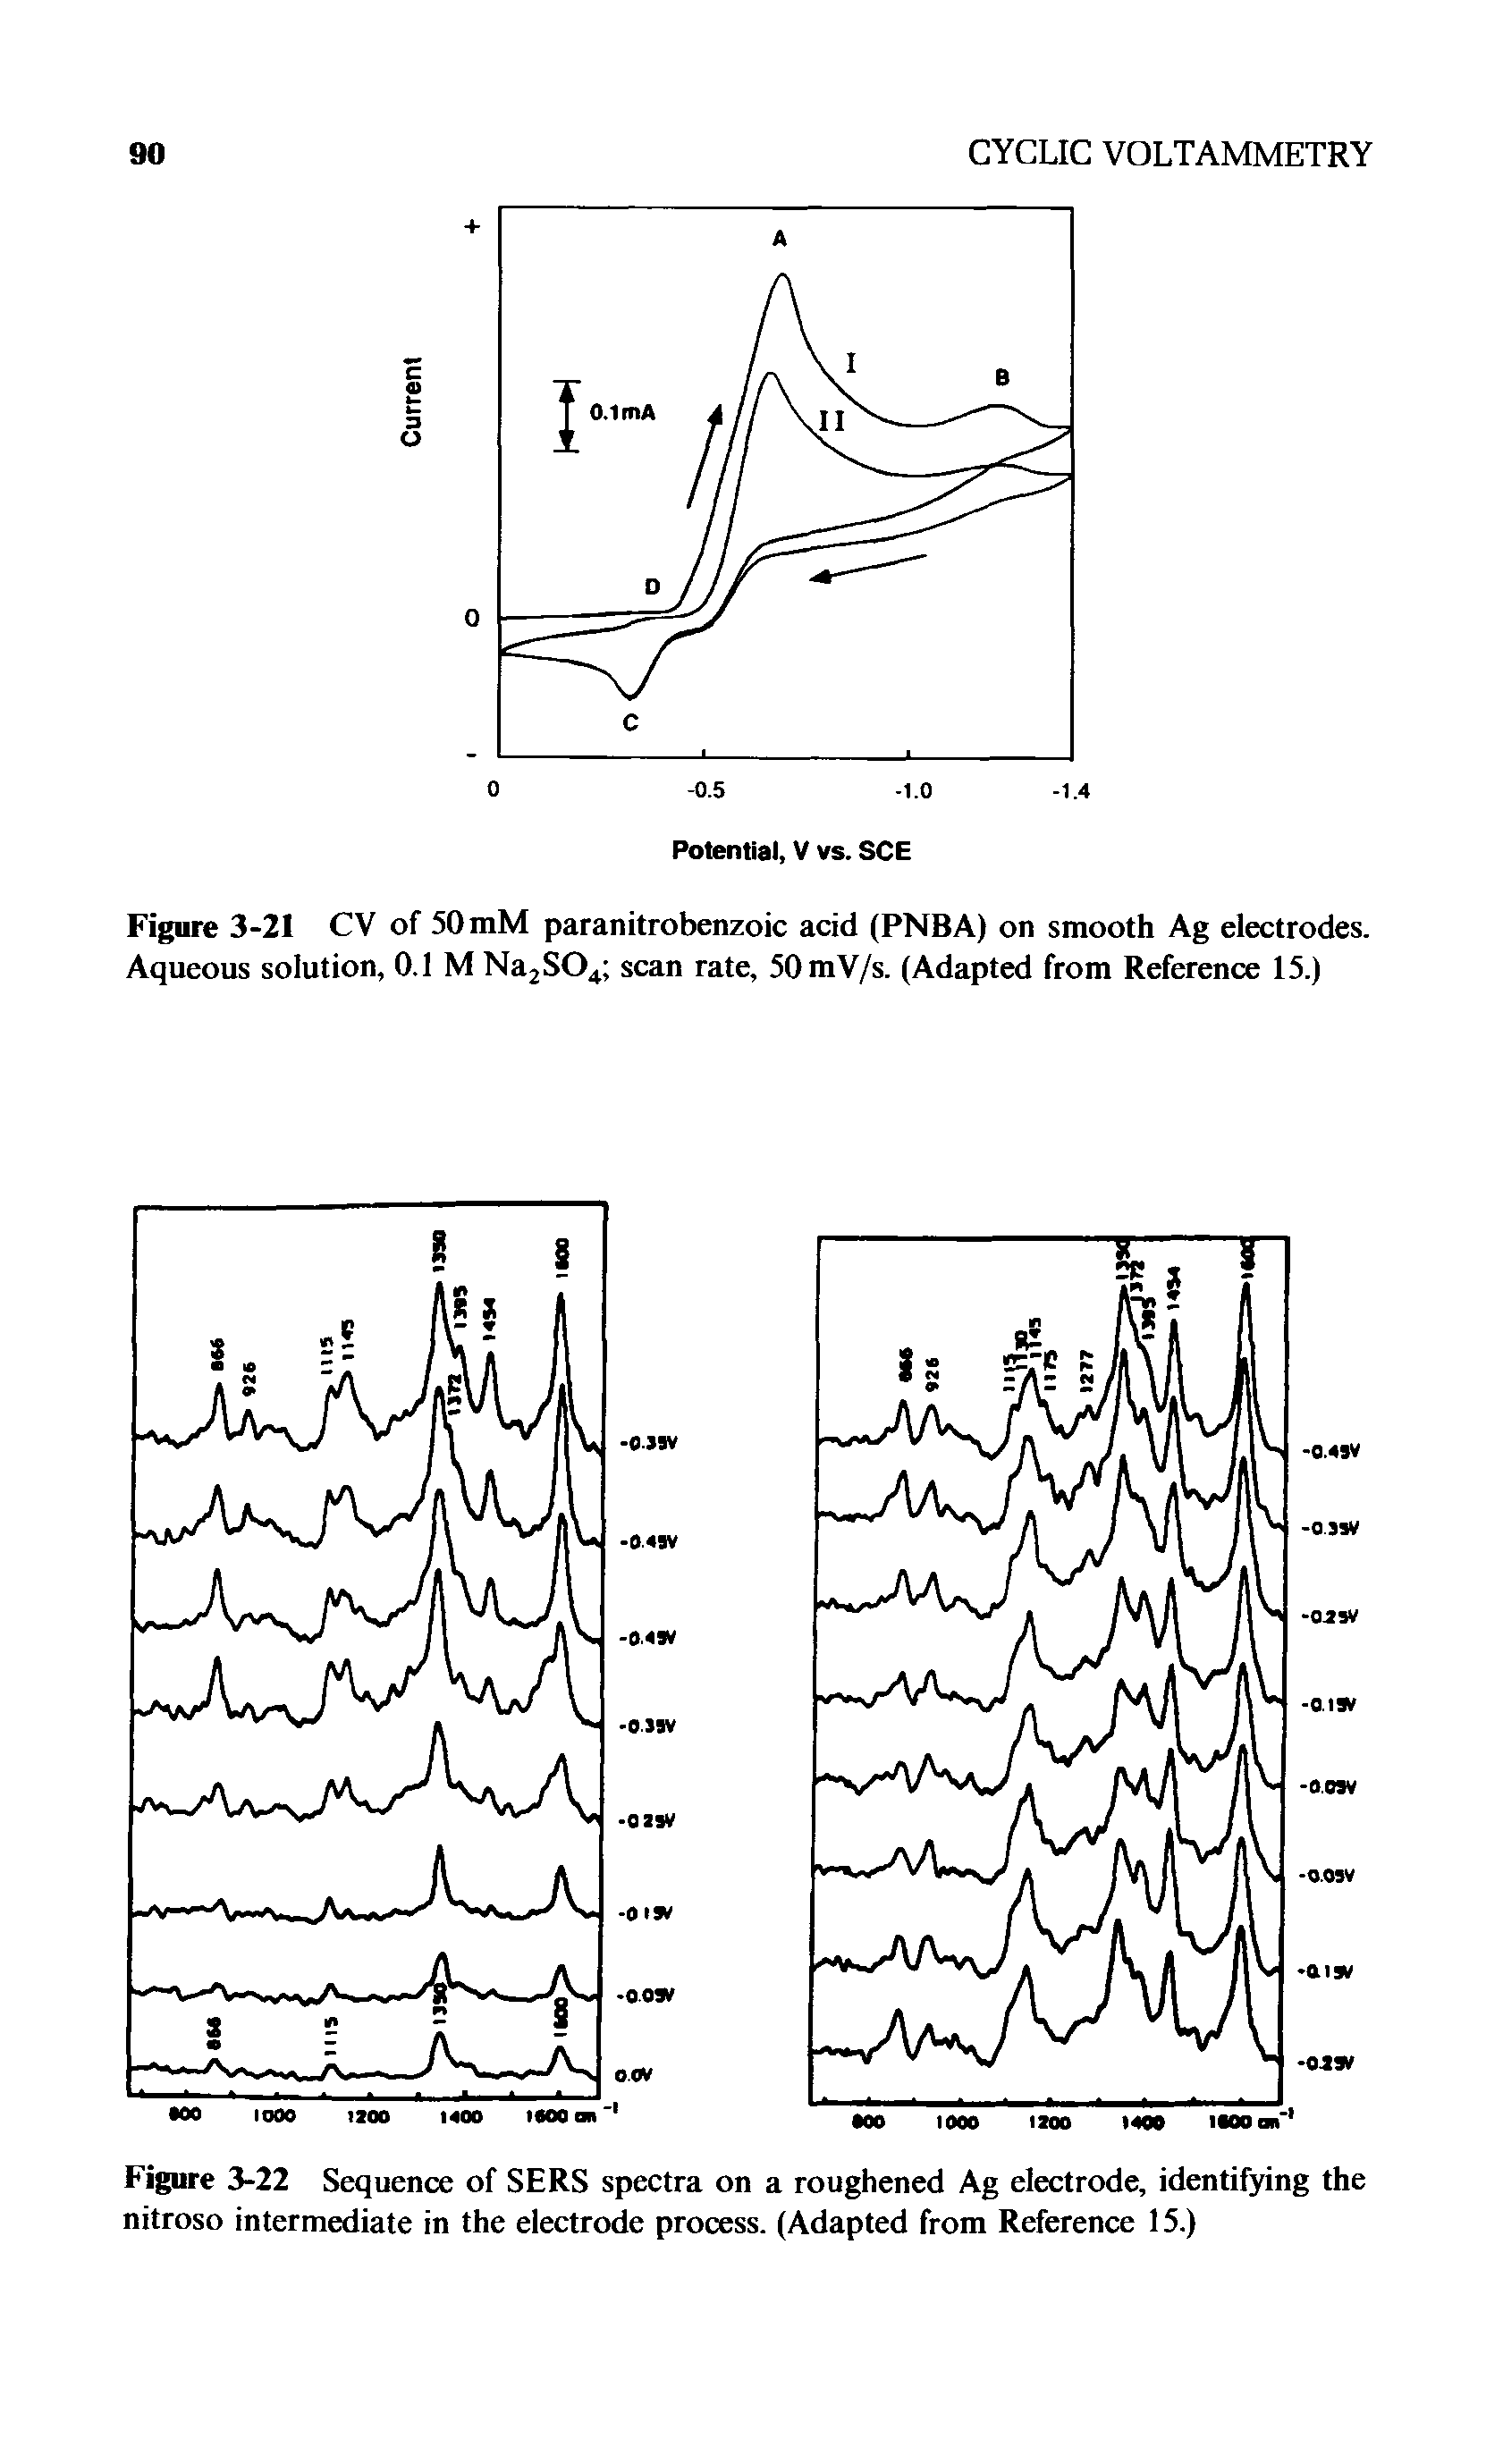 Figure 3-21 CV of 50mM paranitrobenzoic acid (PNBA) on smooth Ag electrodes. Aqueous solution, 0.1 M NajSO scan rate, 50mV/s. (Adapted from Reference 15.)...